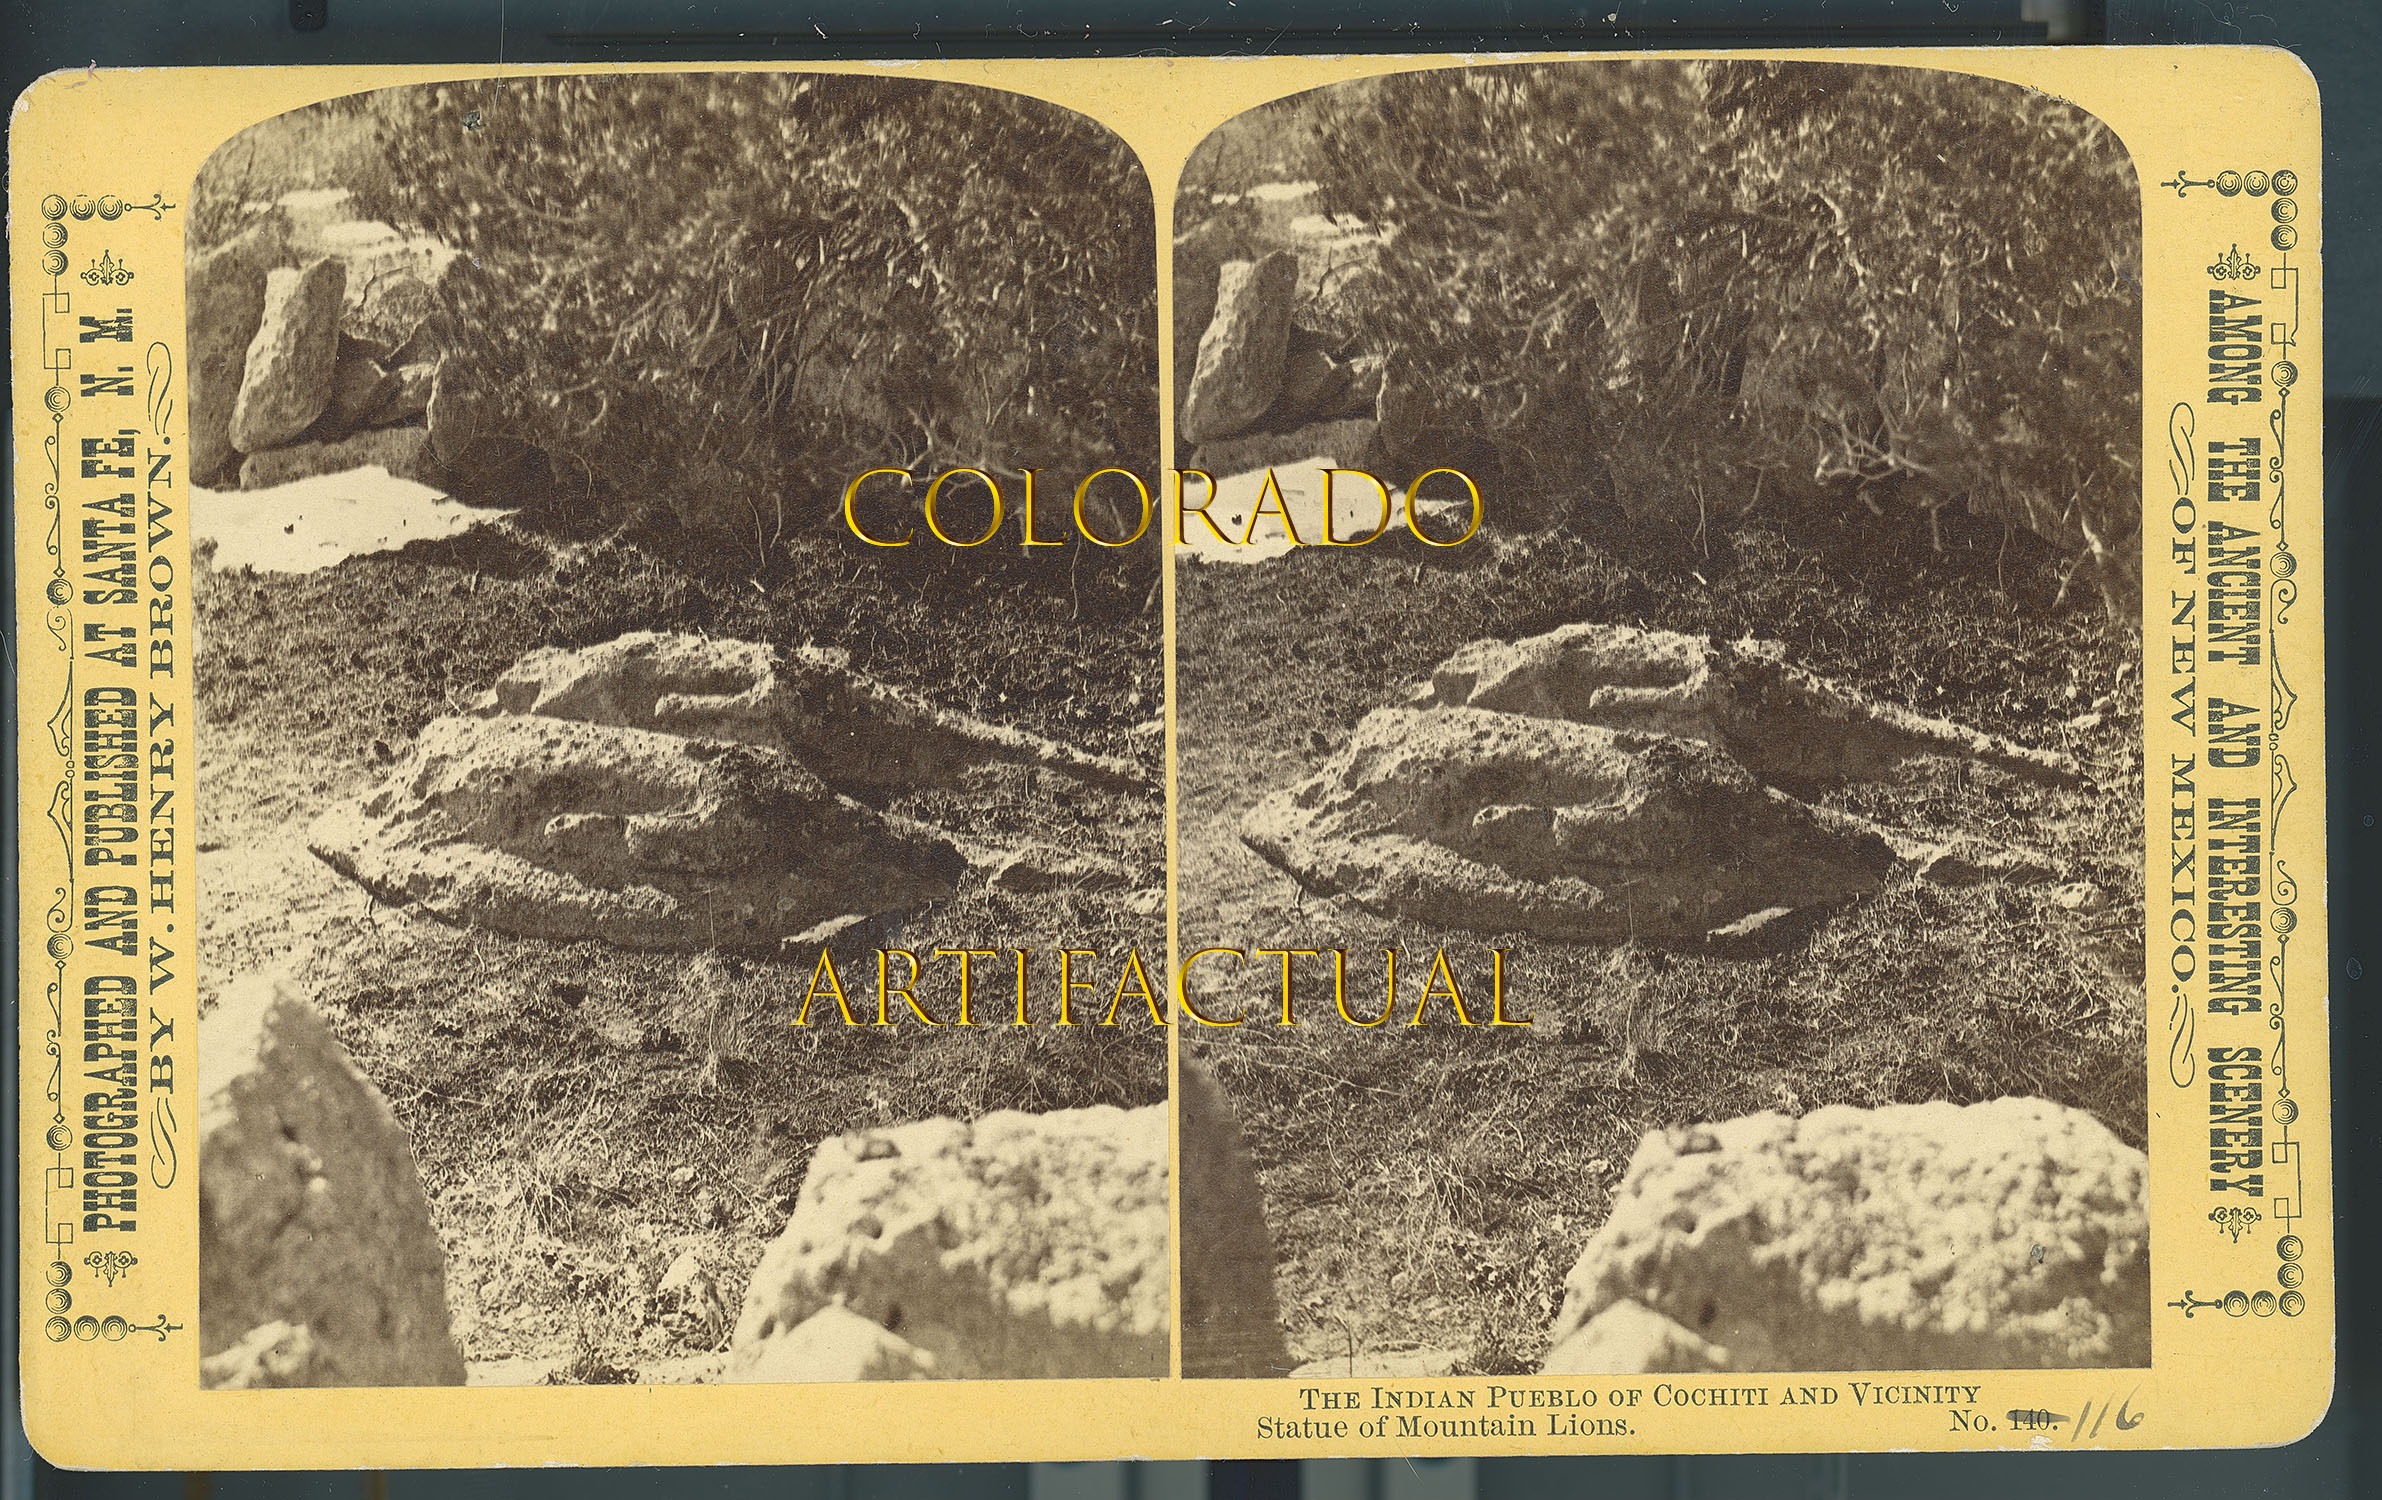 INDIAN PUEBLO OF COCHITI & VICINITY, STATUE OF MOUNTAIN LIONS, NEW MEXICO TERRITORY, W. Henry Brown, Photographer #116, Stereoview